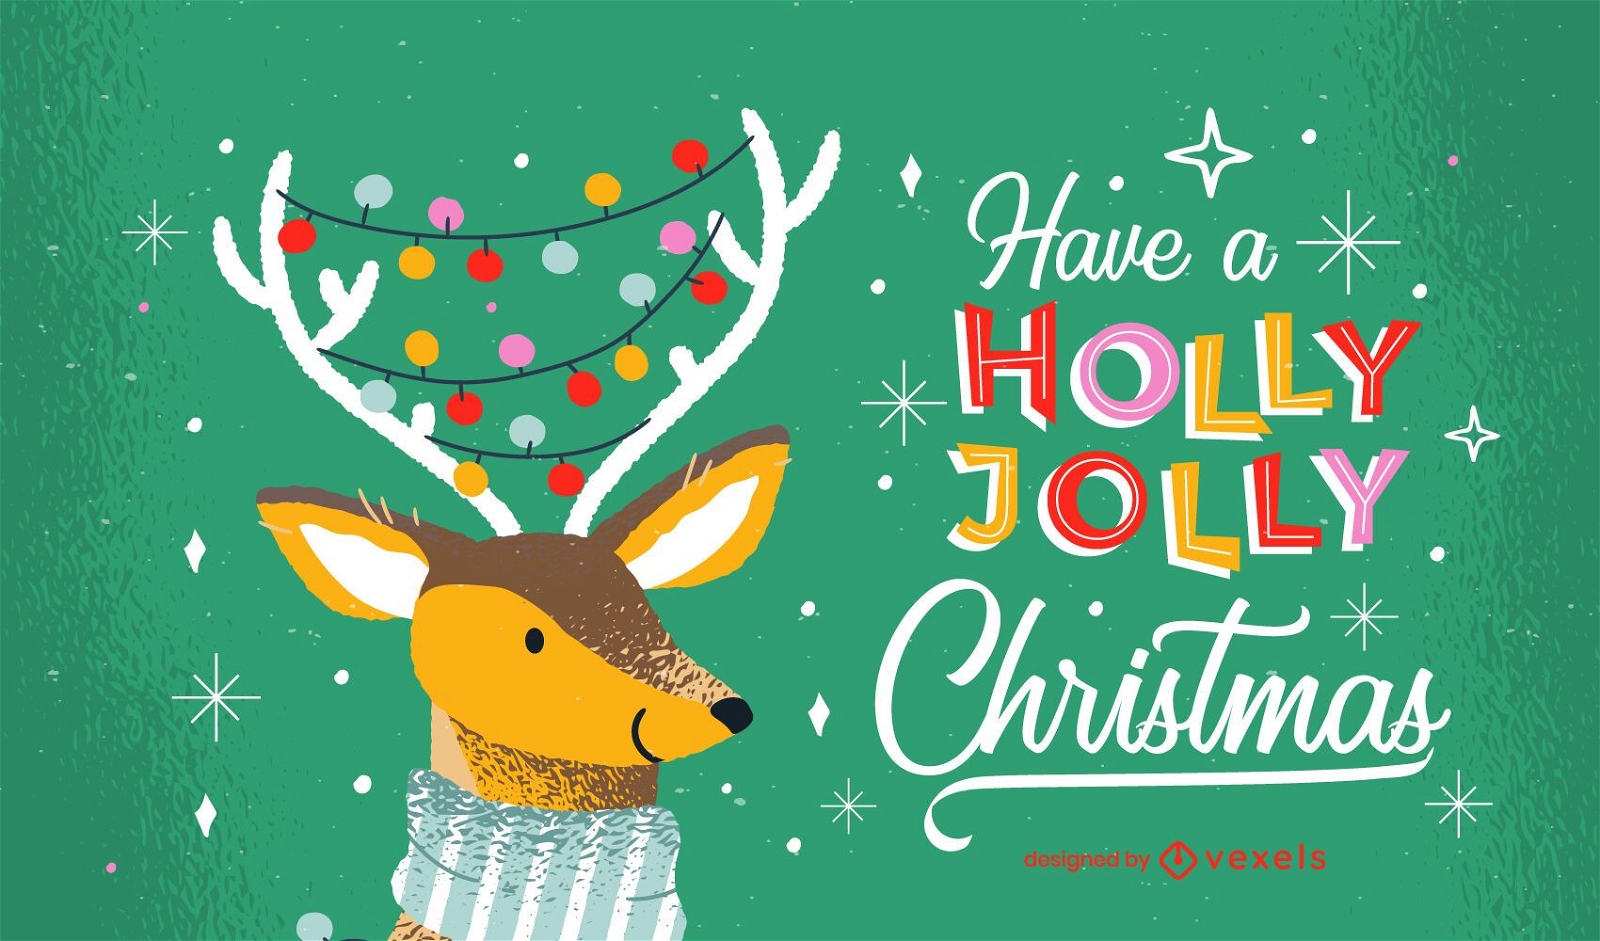 https://images.vexels.com/content/217418/preview/holly-jolly-christmas-lettering-design-a28a54.png